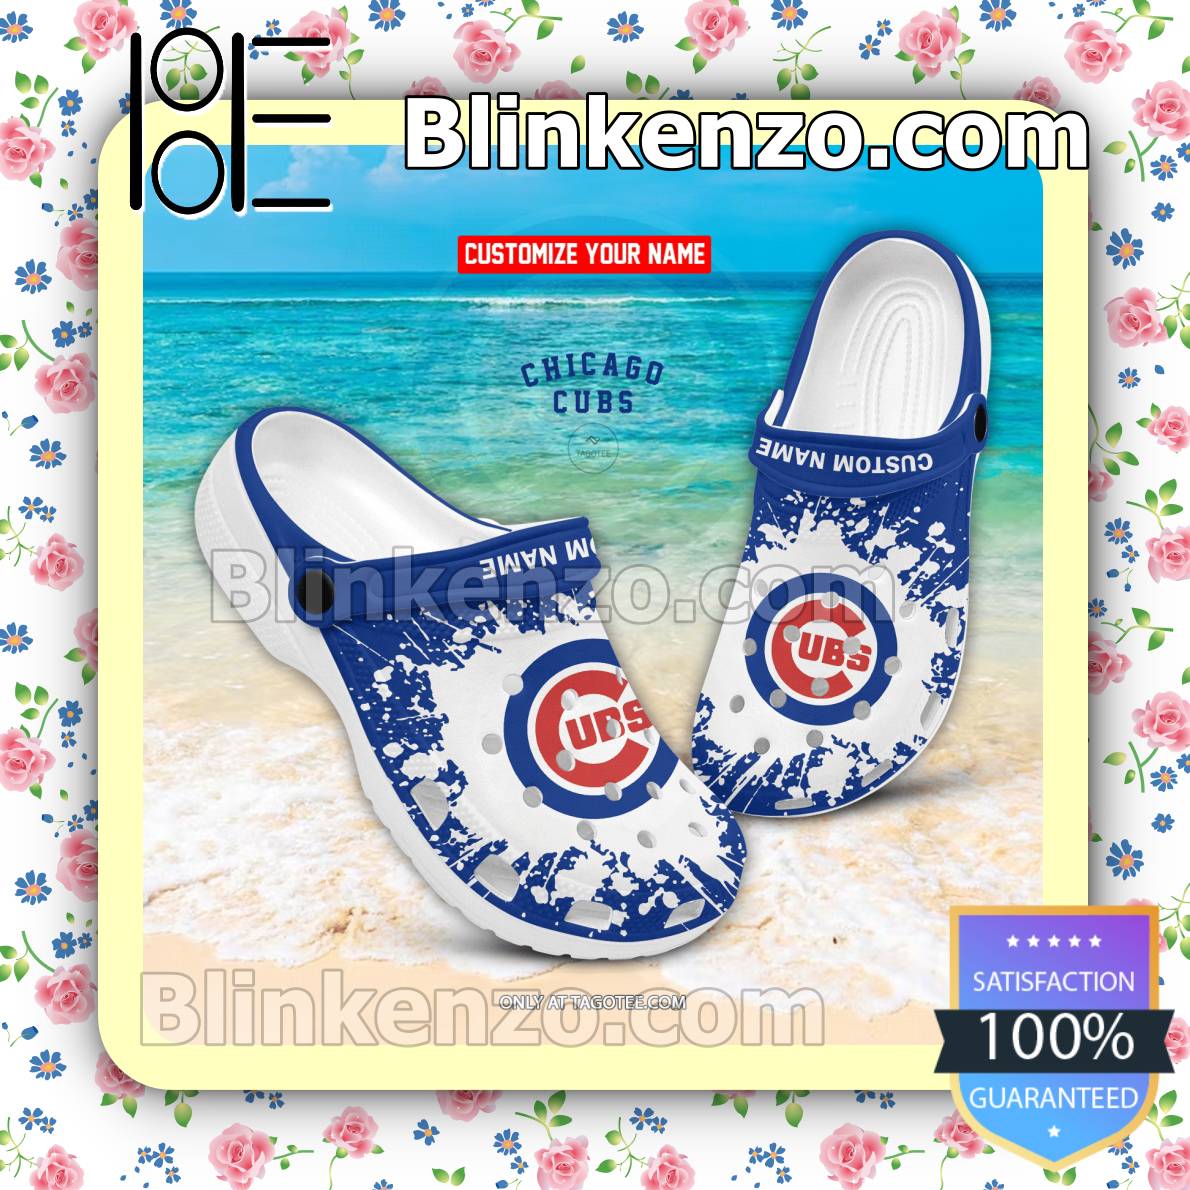 Chicago Cubs Personalized Baseball Logo Team Crocs Clog Shoes - T